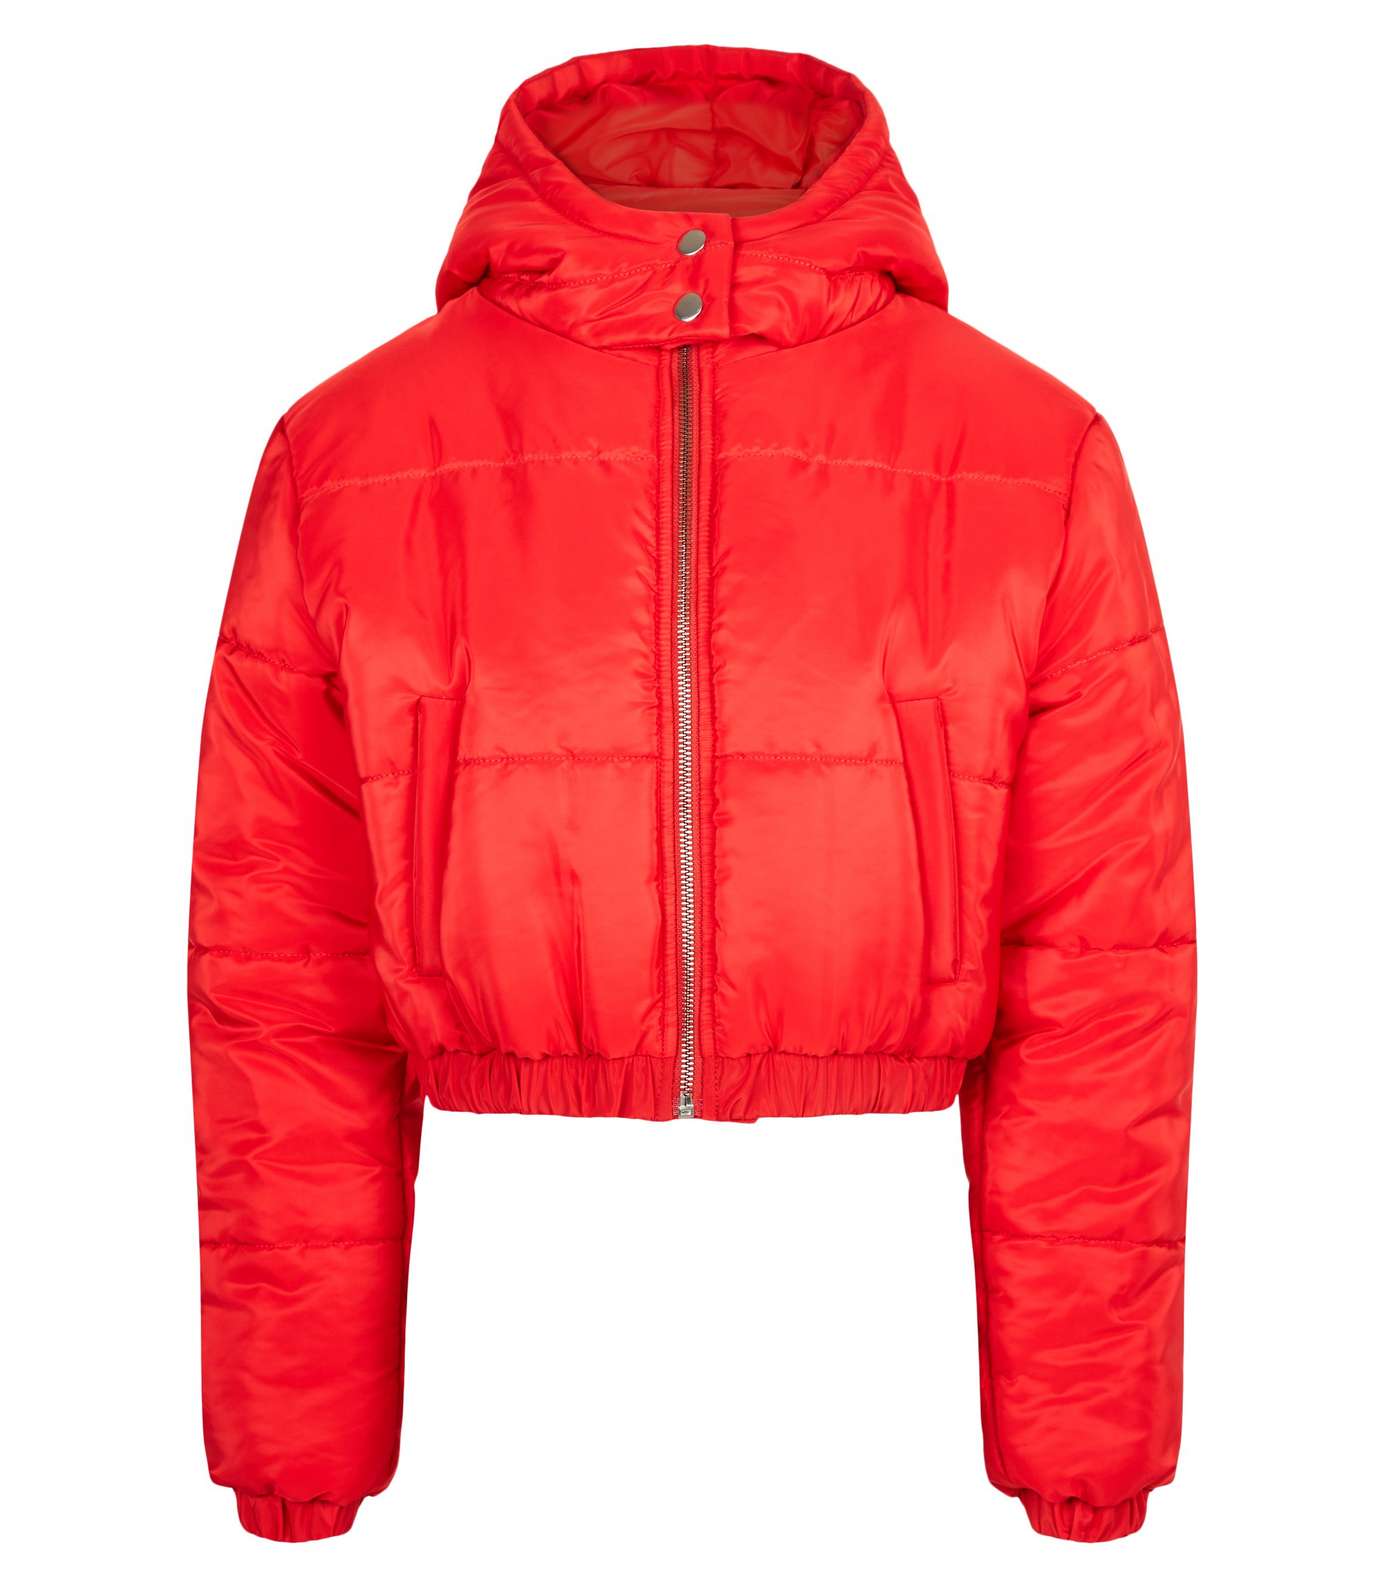 Girls Red Hooded Puffer Jacket Image 4